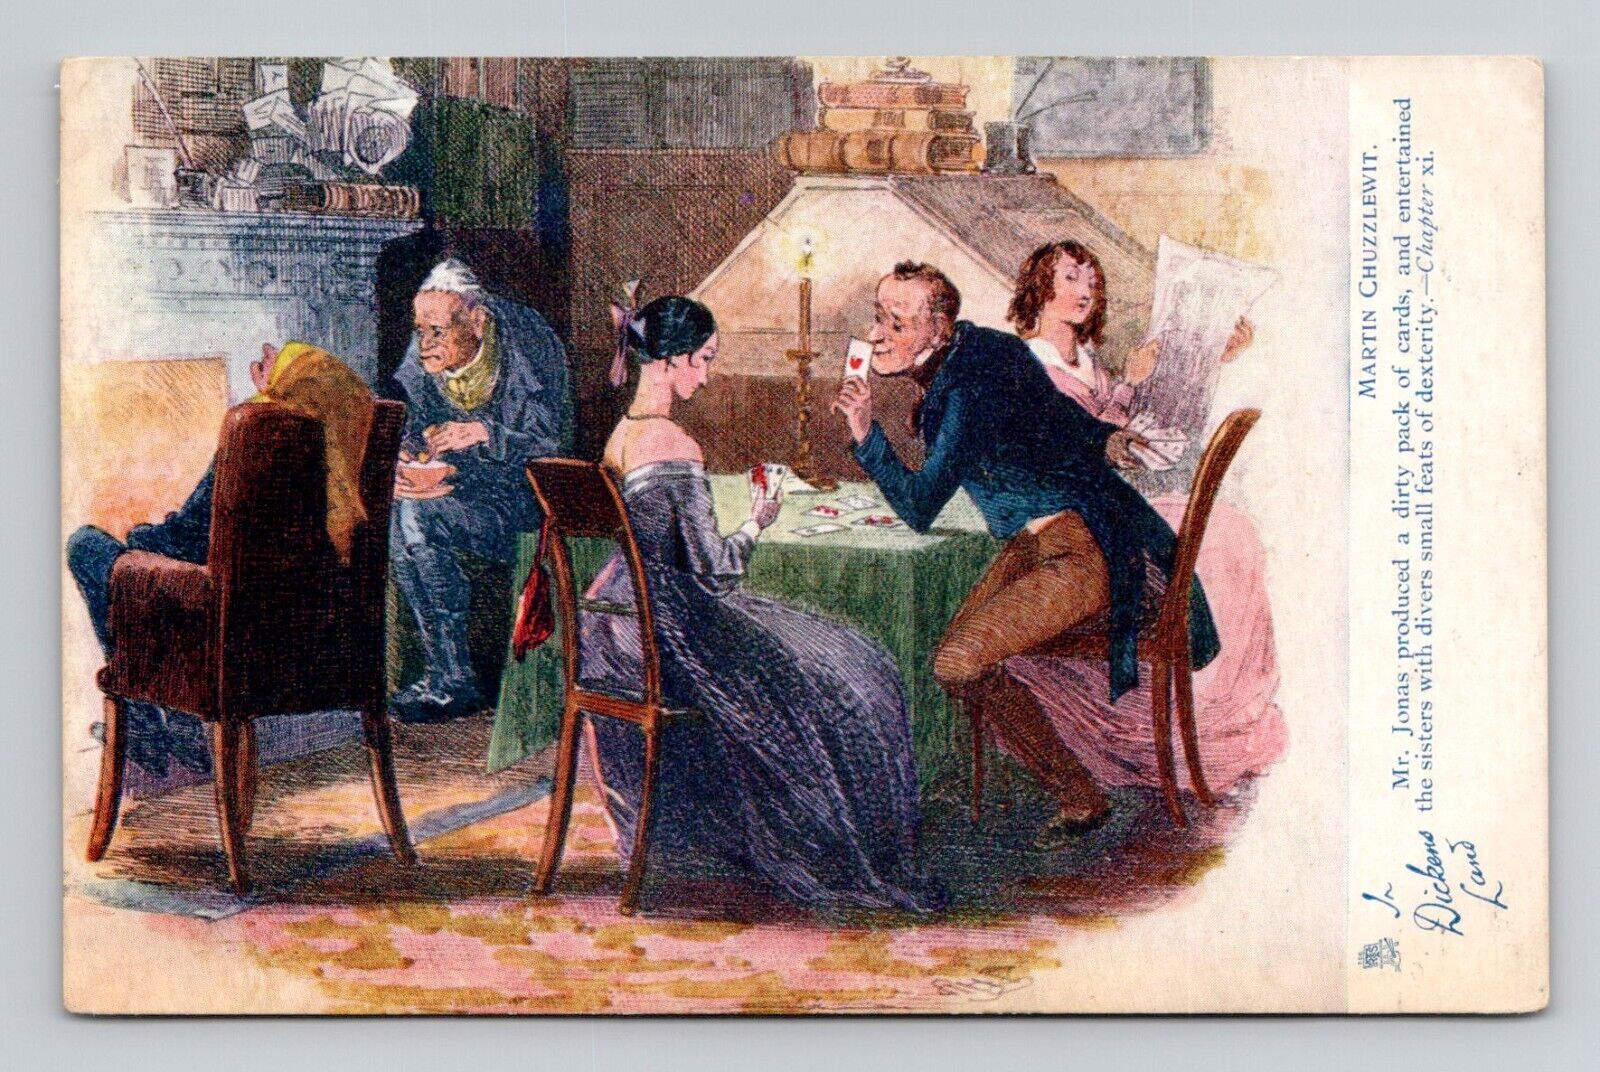 Postcard Martin Chuzzlewit Charles Dickens Oilette, Antique Tuck A11